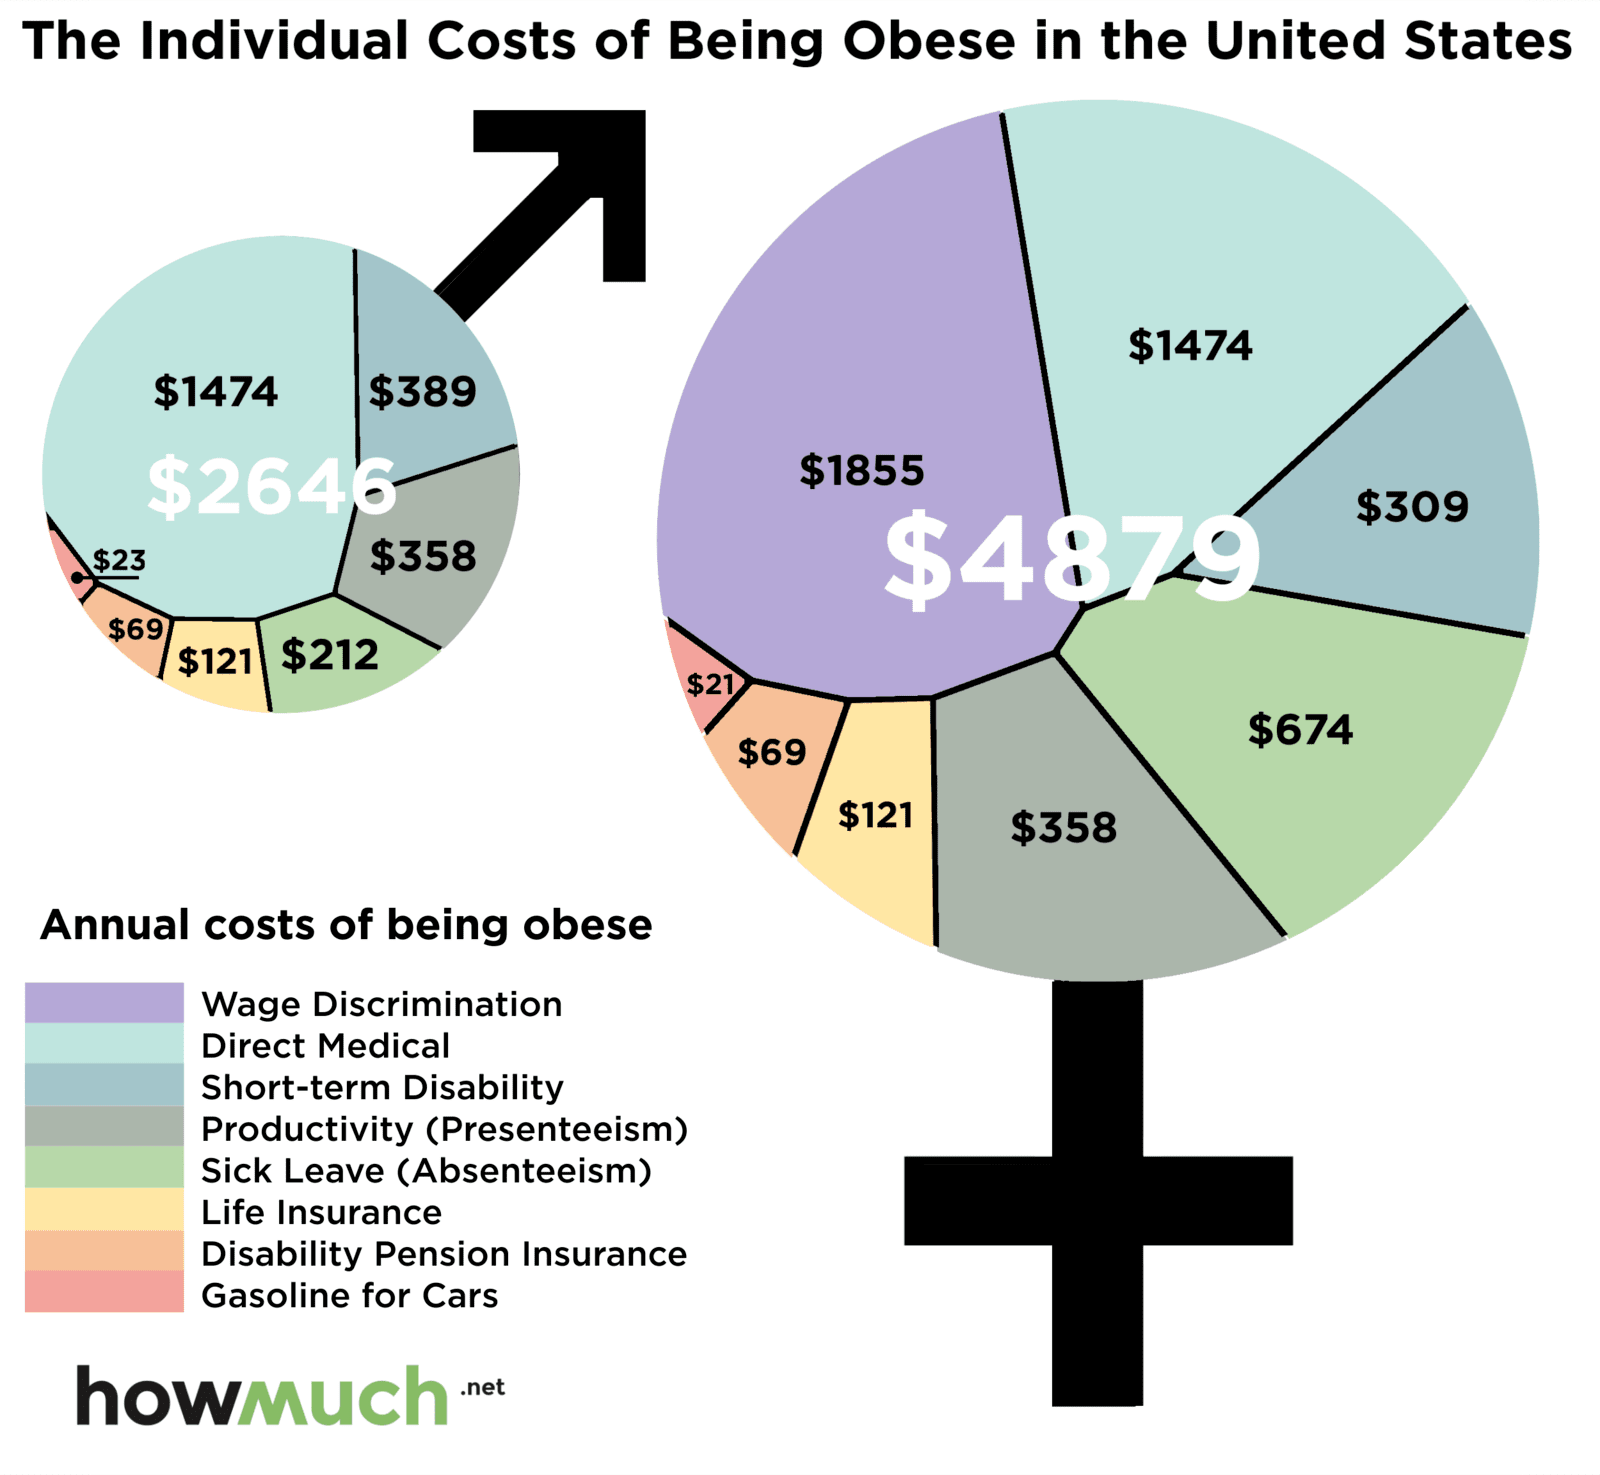 The individual cost of being obese in the U.S.